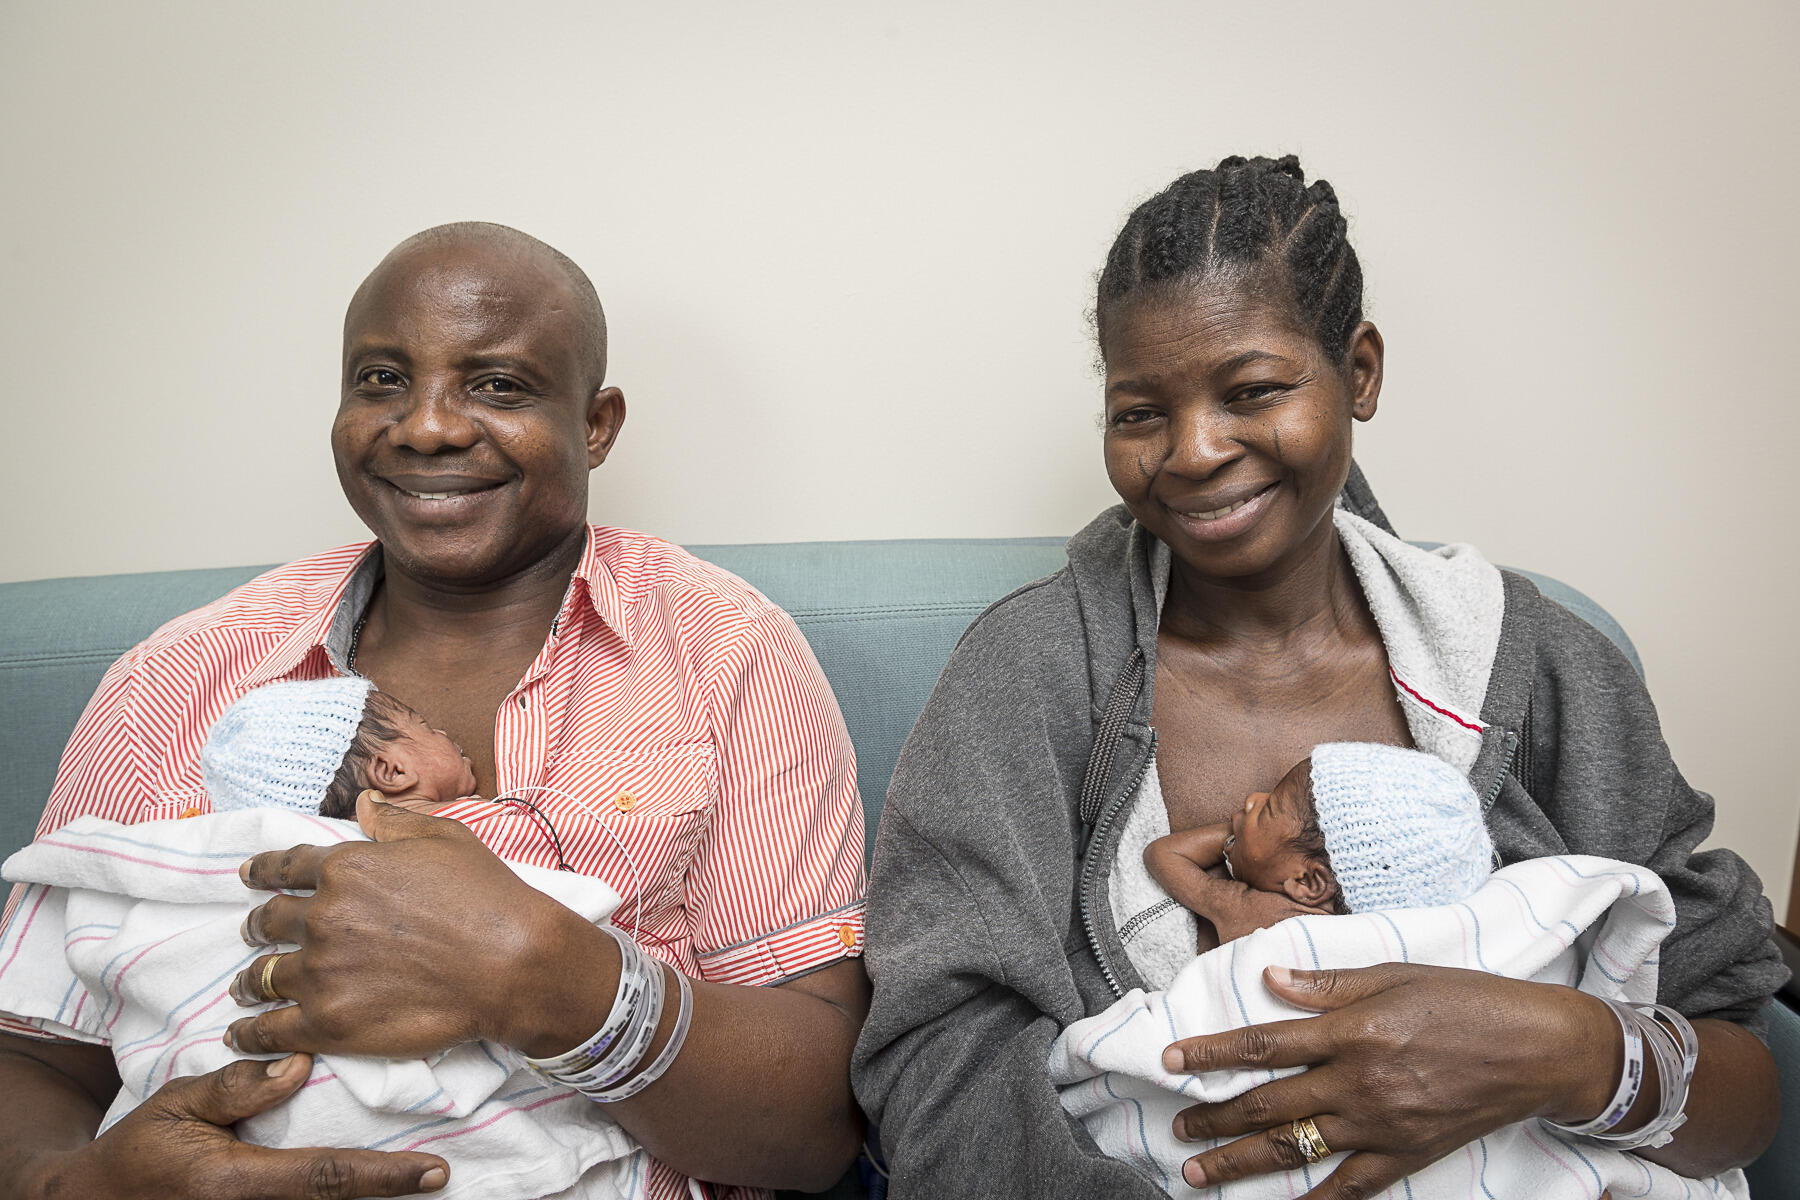 (L to R) Adeboye and Ajibola Taiwo held two of their sextuplets on May 23, 2017. The couple practiced kangaroo care, also known as skin-to-skin. During kangaroo care, the baby is held against the bare chest of a parent. The act of placing the infant skin-to-skin with mom or dad has been shown to maintain skin temperature regulation of the newborn, increase initiation of successful breastfeeding, and ease the transition to life outside the womb.